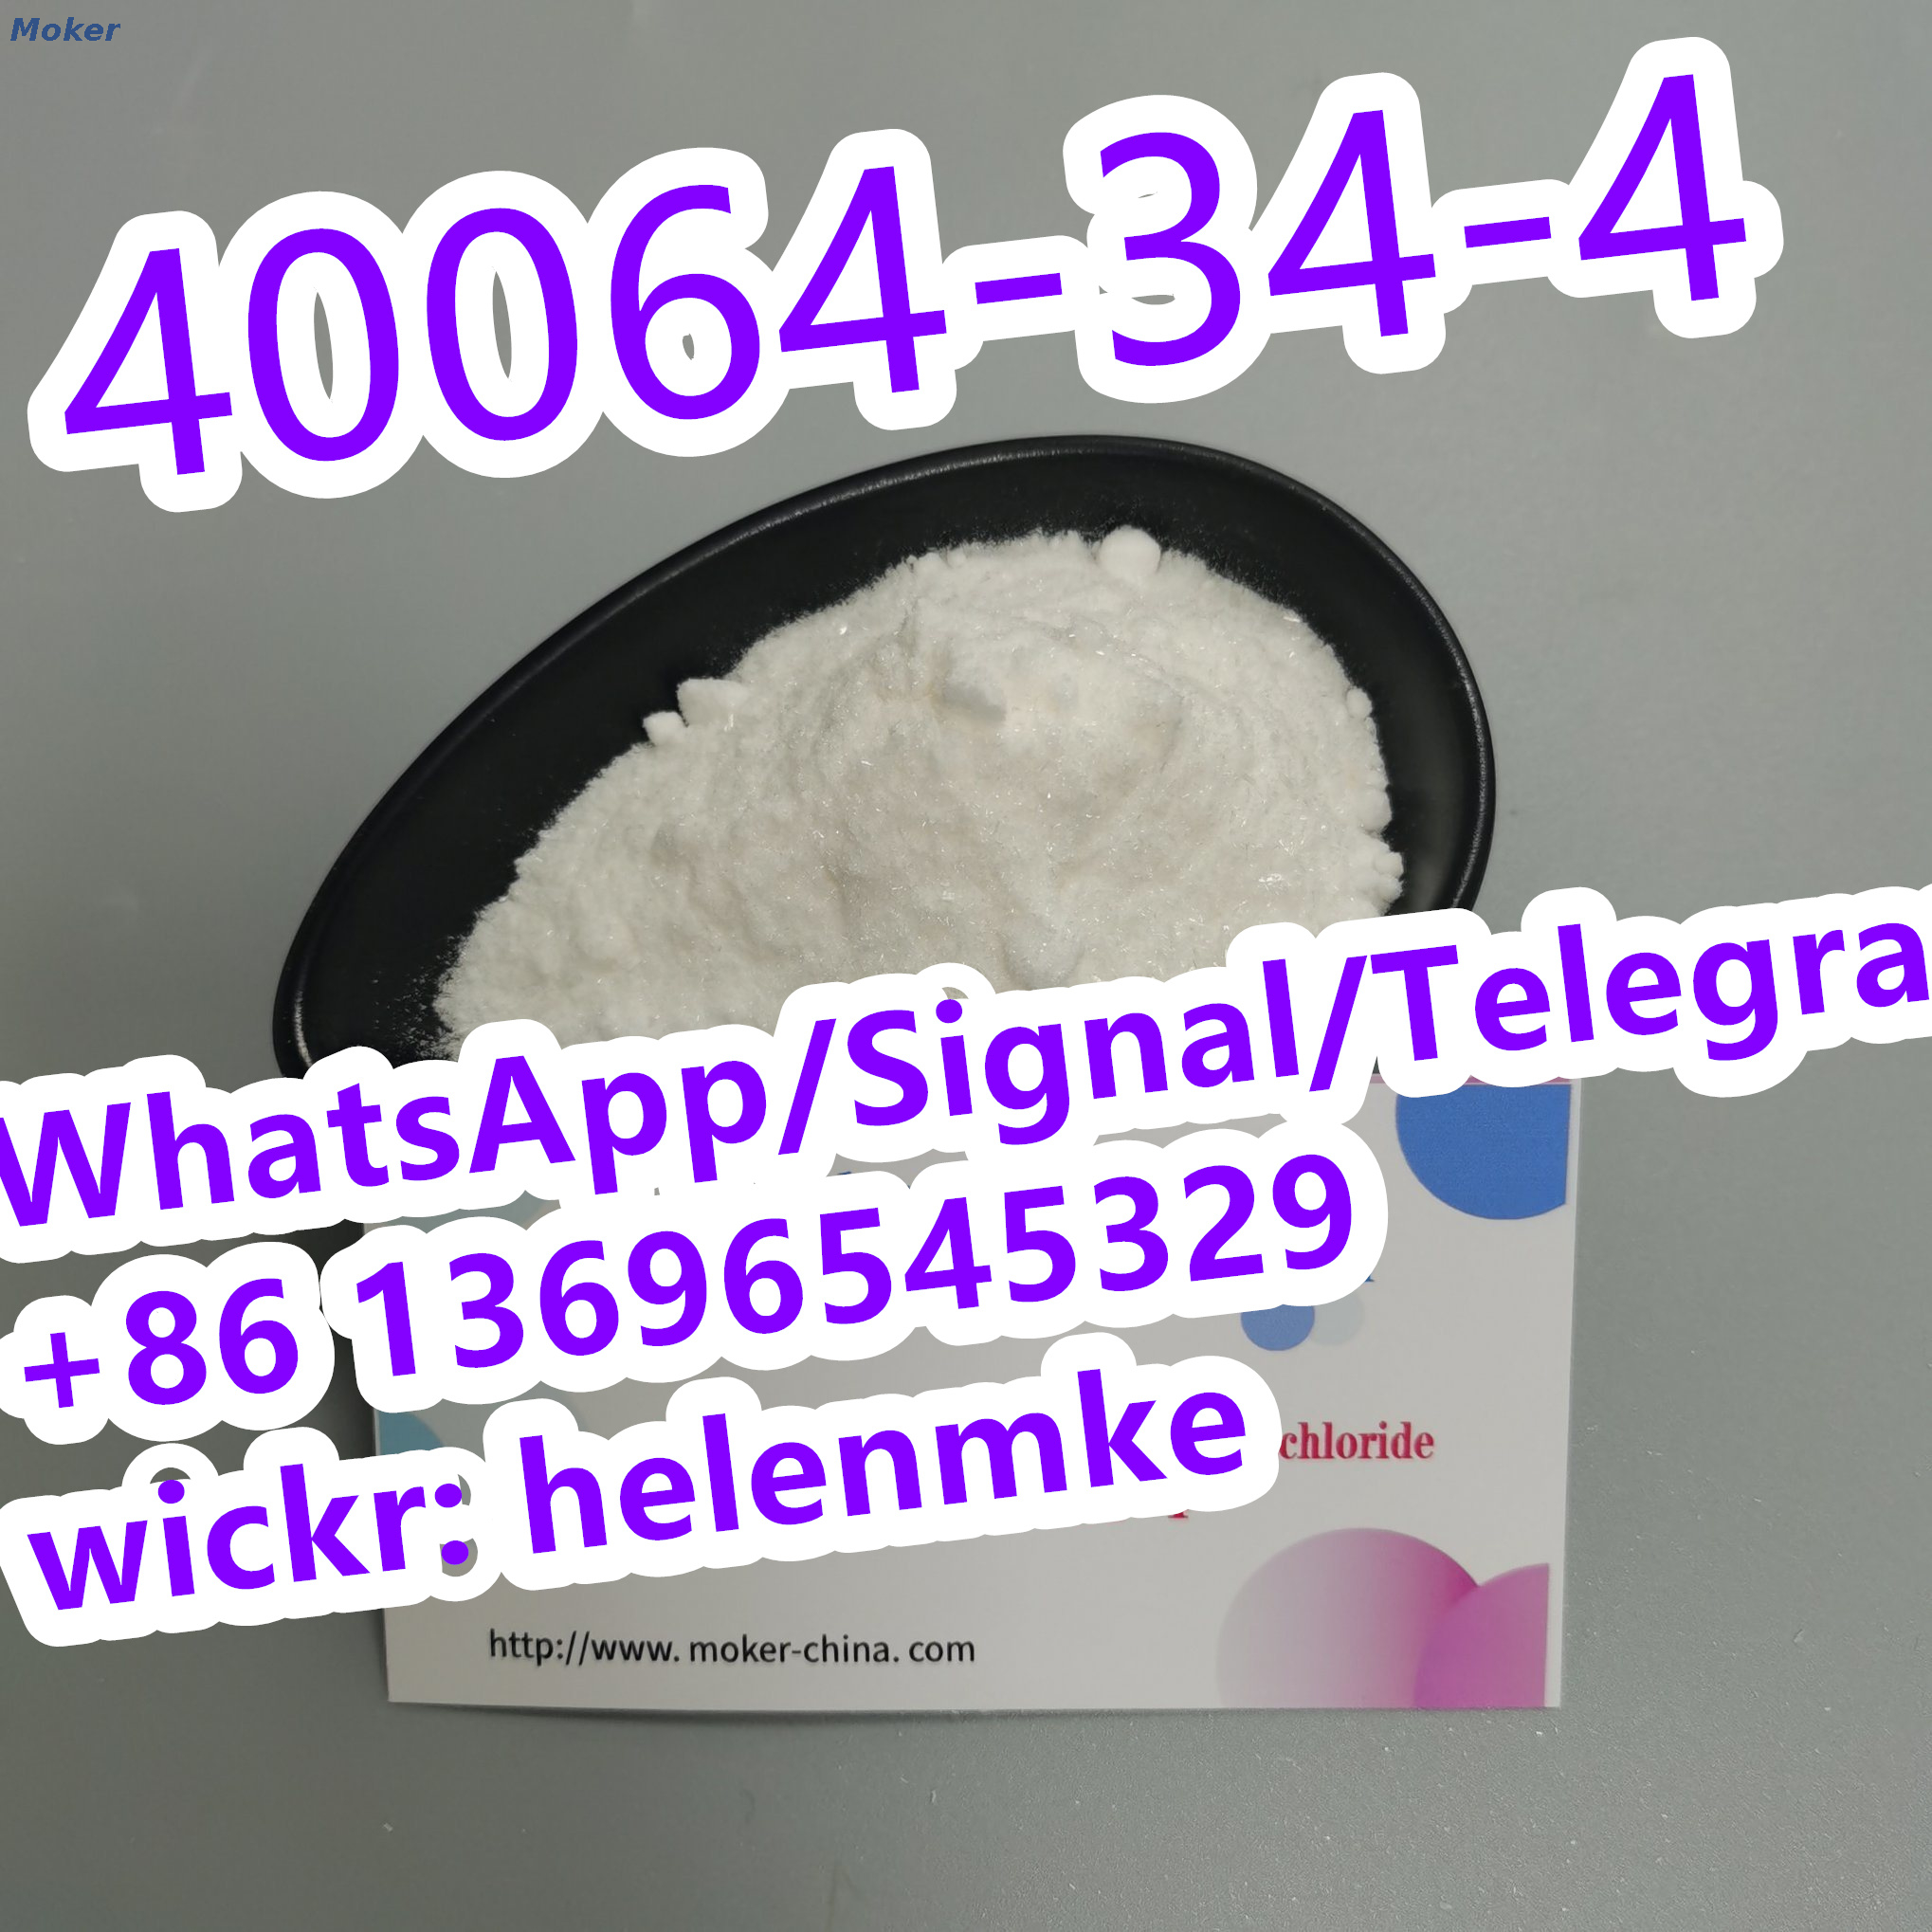 Pharmaceutical Intermediate 4, 4-Piperidinediol Hydrochloride CAS 40064-34-4 with 99% High Purity 